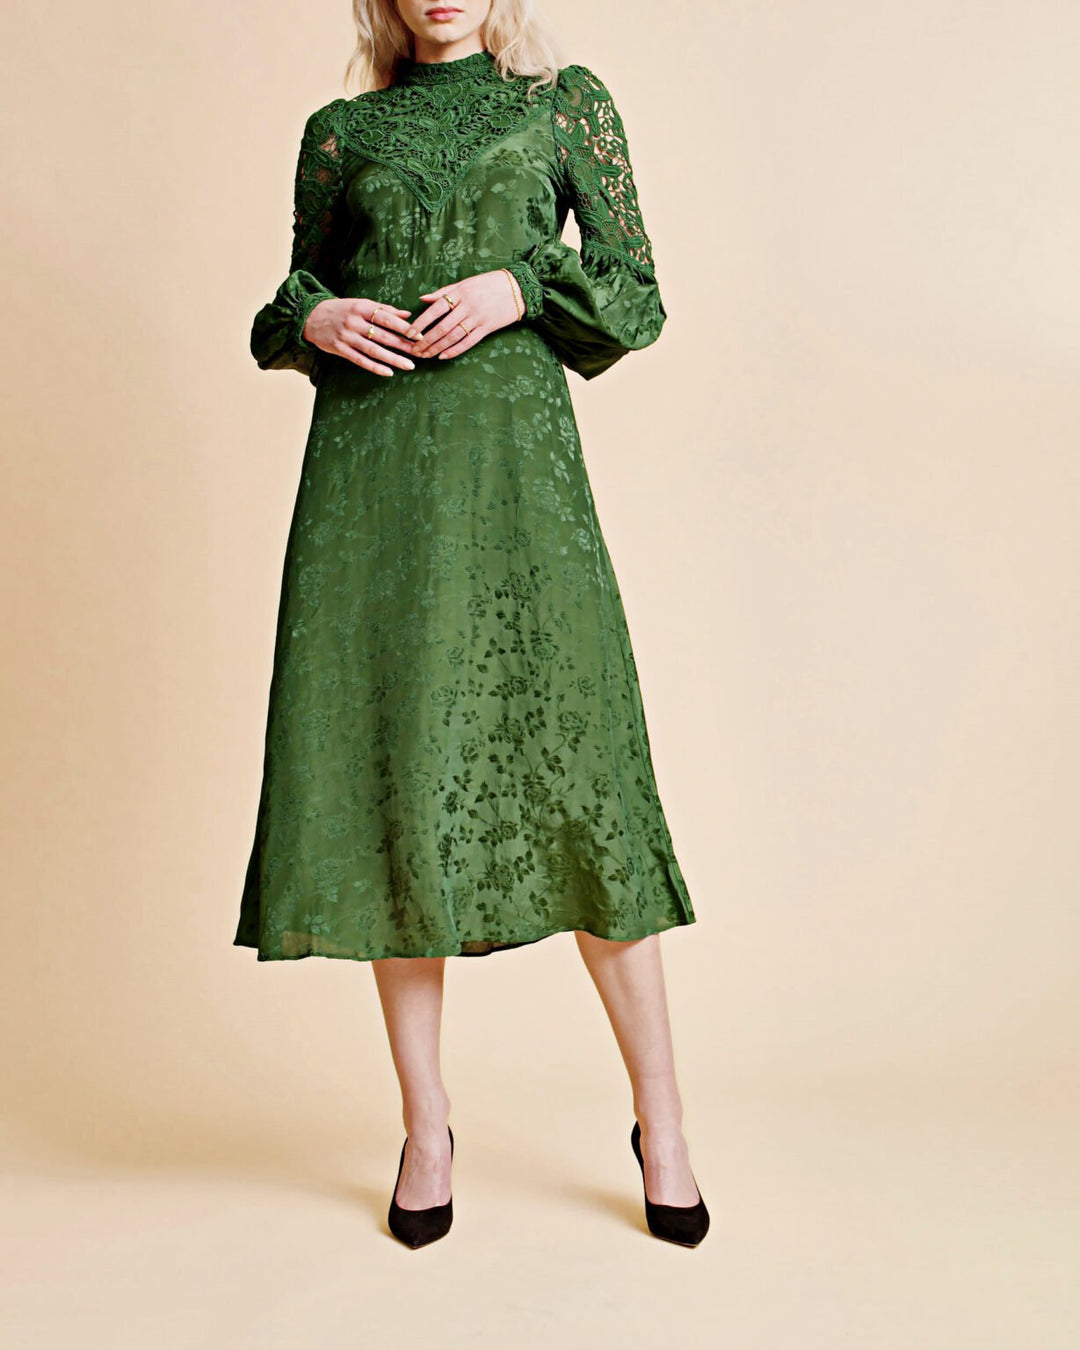 byTiMo Apparel byTiMO | Jacquard Lace Dress in Emerald